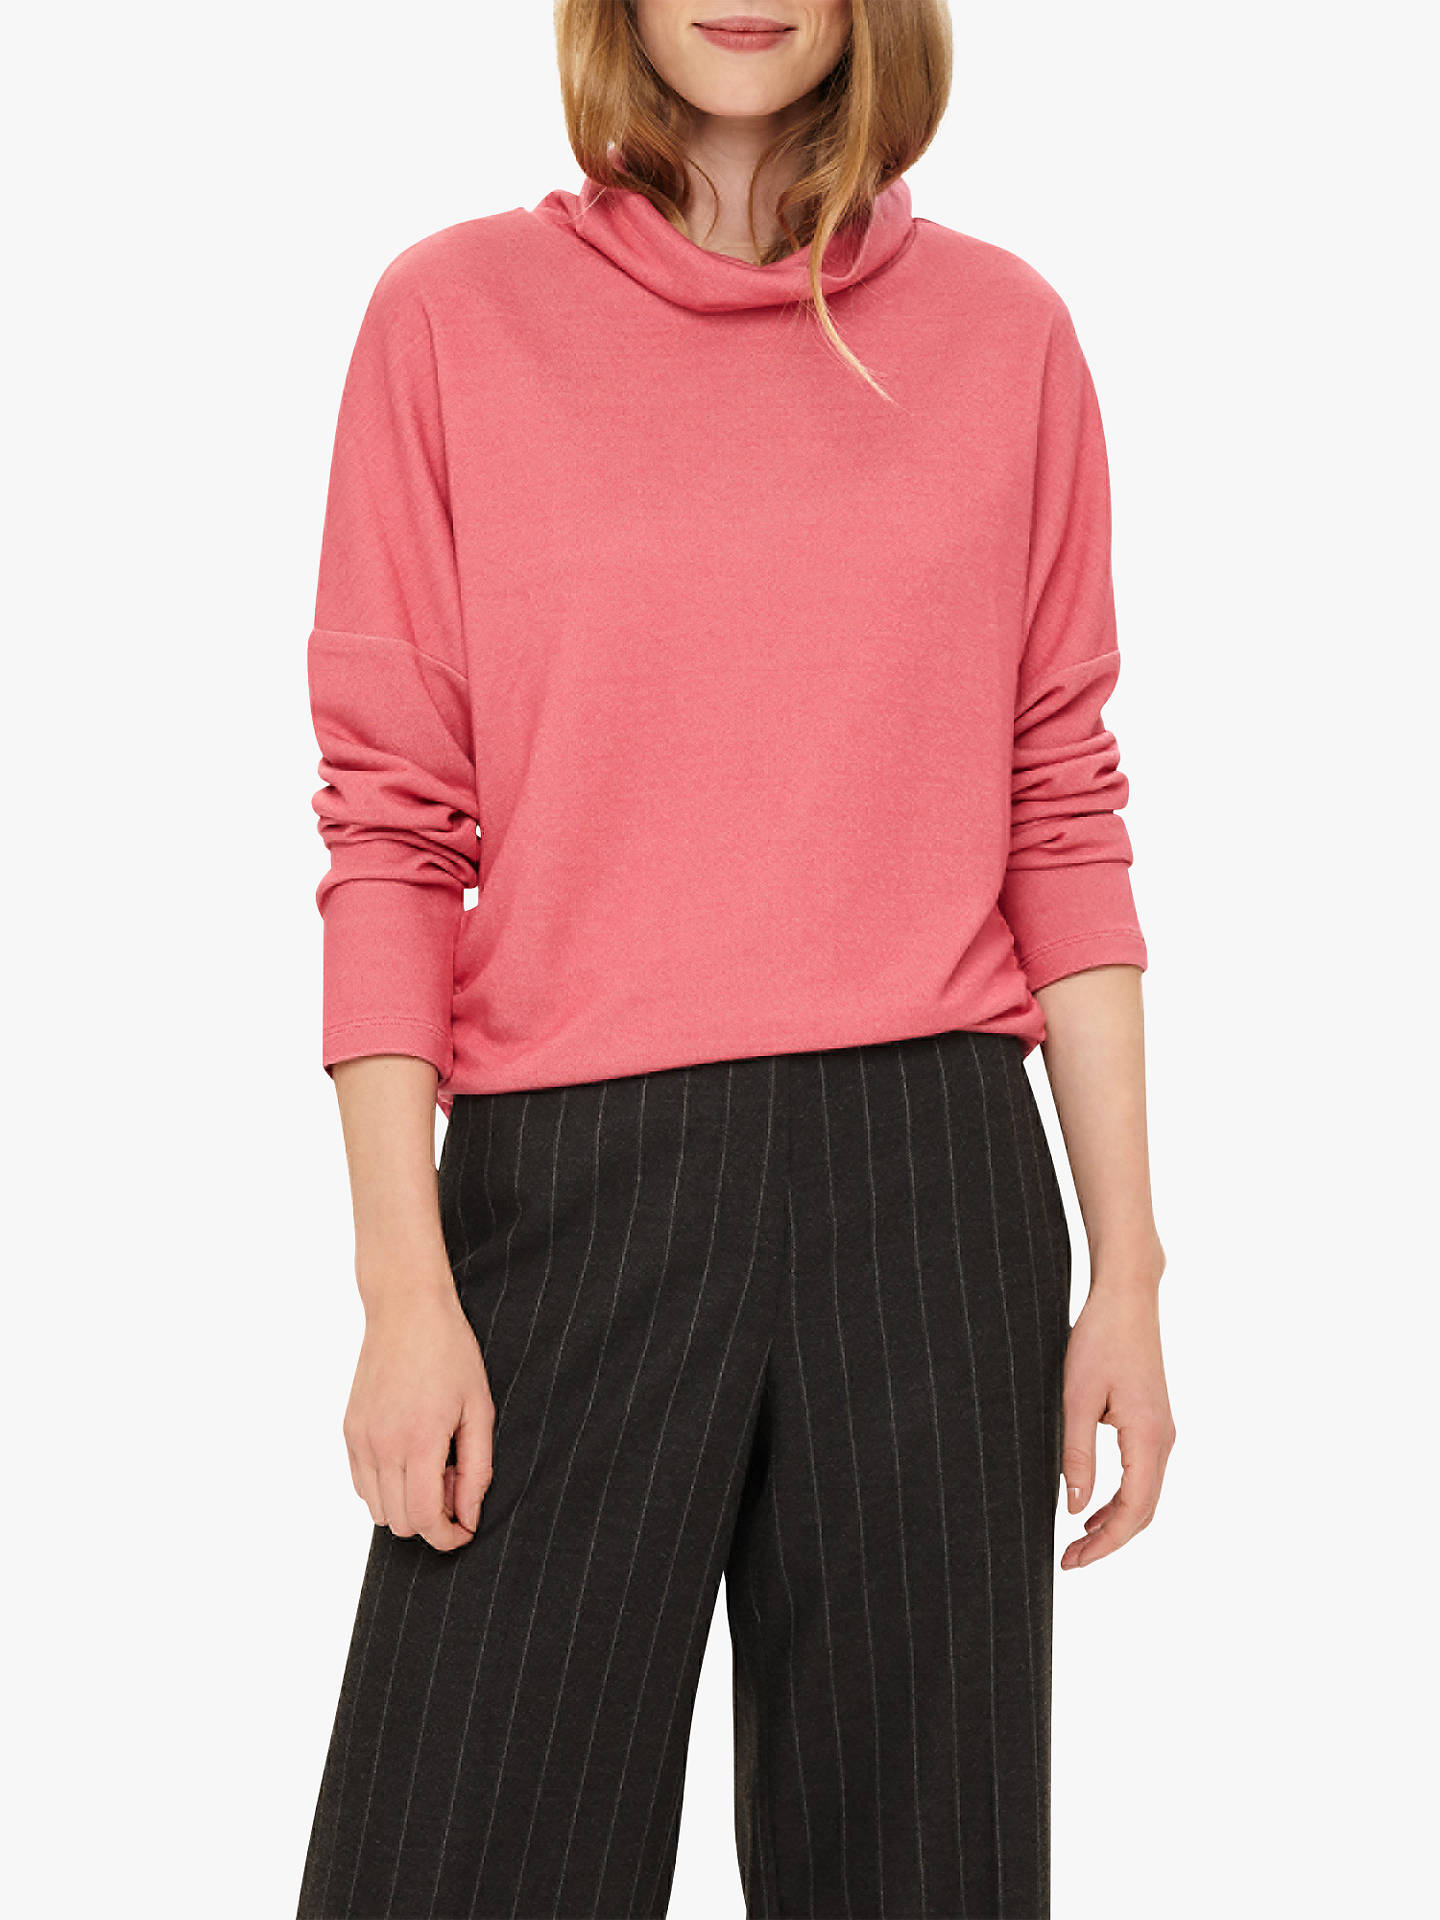 Phase Eight Liora Cow Neck Top, Pink at John Lewis & Partners